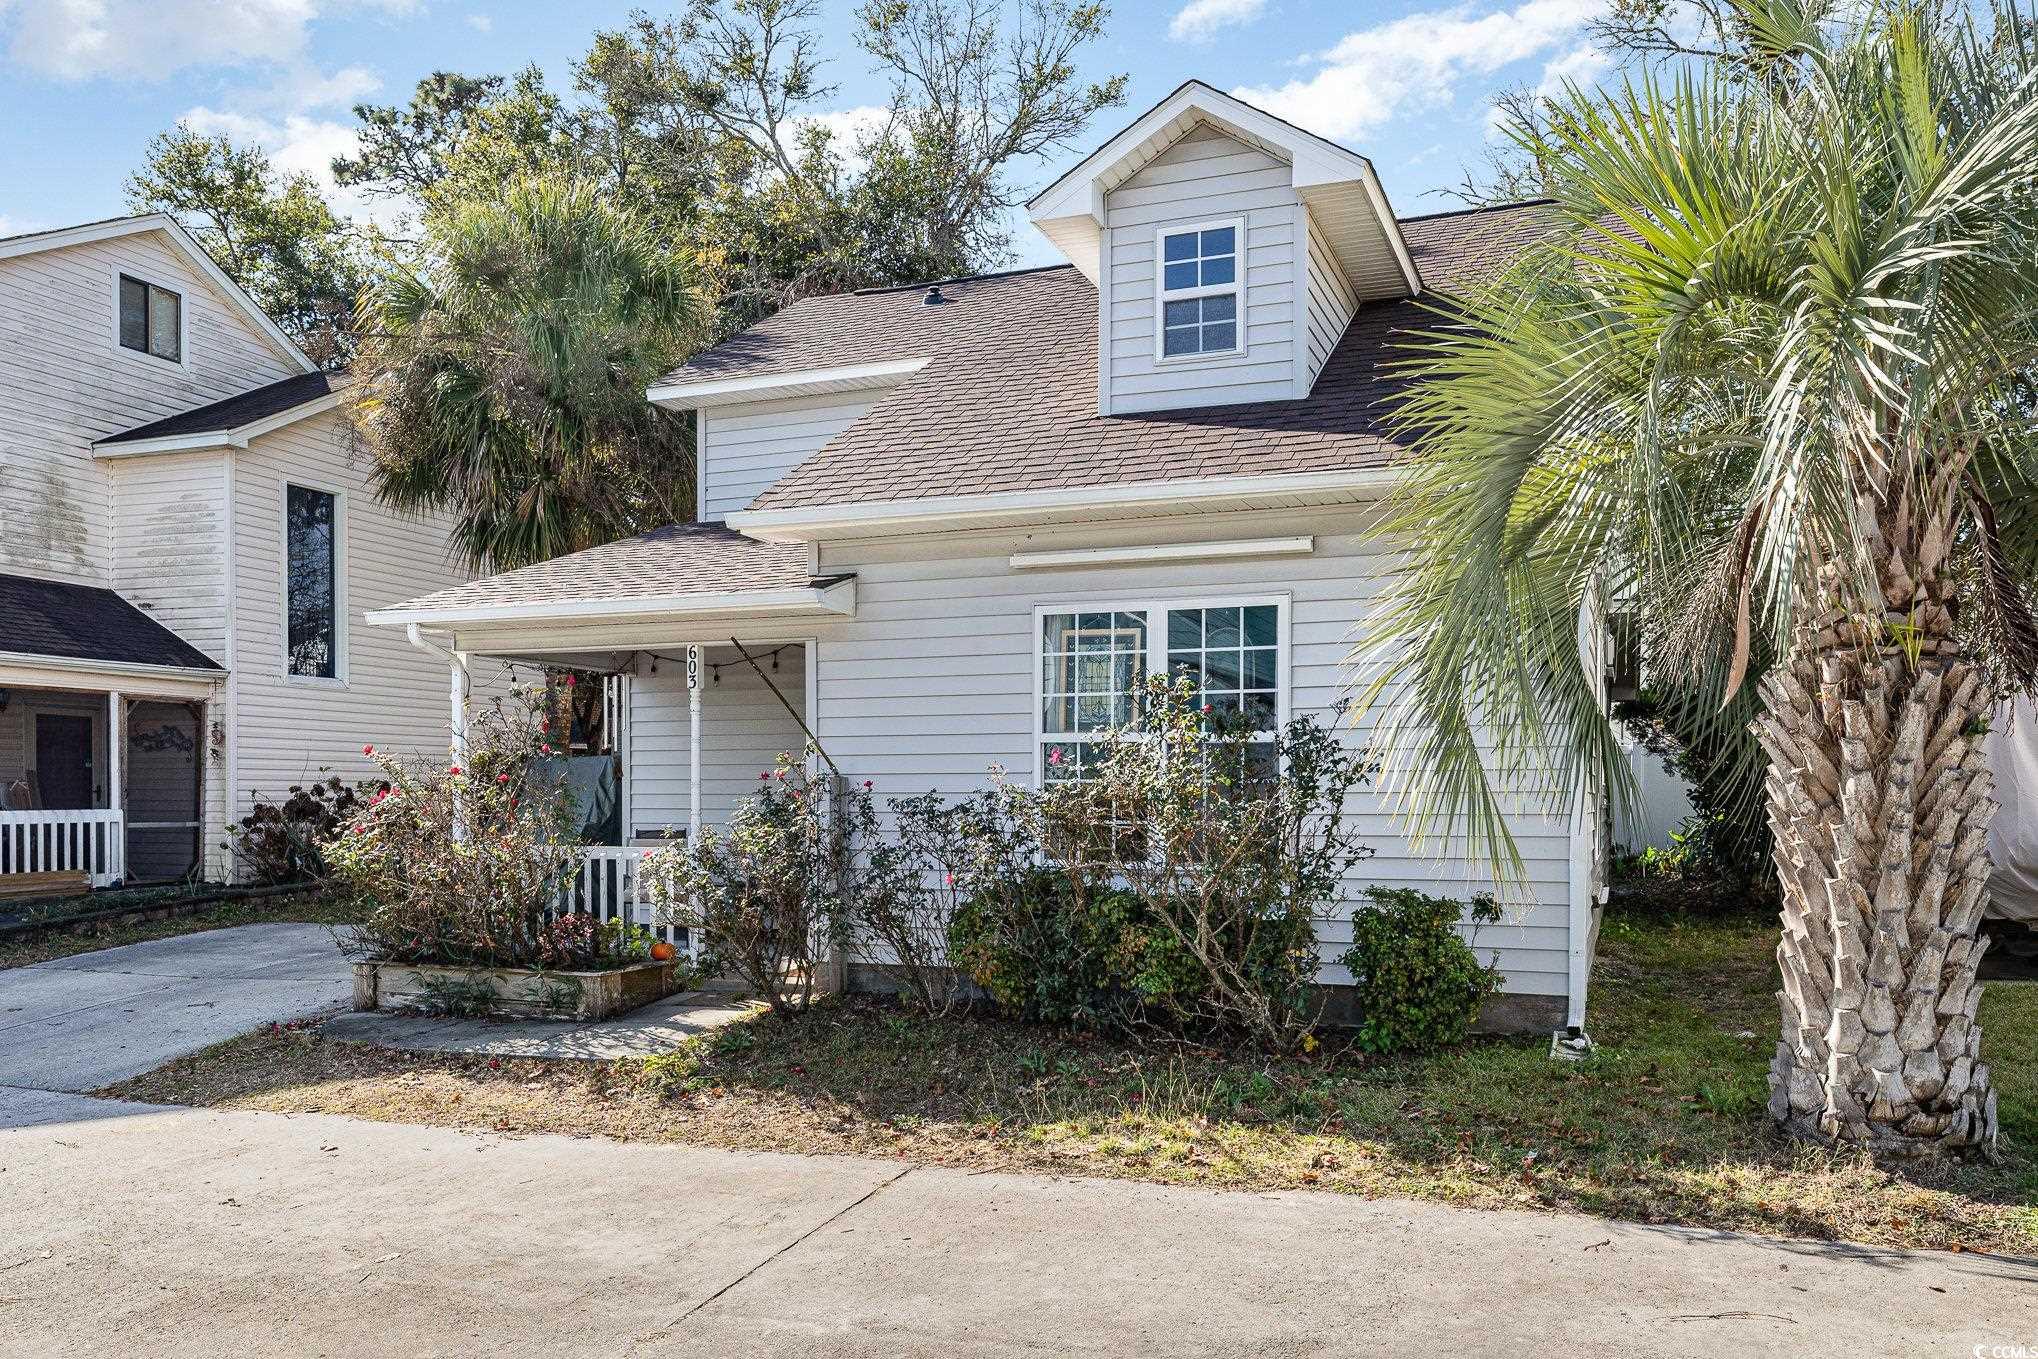 this beautiful 3 bedroom/2 bath home is perfectly situated in a prime location, just 2 blocks away from the beach. one of the standout features of the home is that it does not have an hoa (home owners association), giving you more freedom and flexibility.   the layout of the house is designed for convenience, with the master bedroom located on the first floor. this makes it easy and accessible for everyday living.   as you step into the living room and kitchen area, you'll be greeted by stunning bamboo flooring, adding a touch of elegance to the space. the kitchen is equipped with 42-inch cabinets that have soft-closing features, and the drawers also have full extension and soft-closing capabilities, ensuring smooth operation. additionally, there is a custom-built cabinet/entrainment system adding a stylish and functional element.     upstairs, you'll find a screened-in balcony that offers a peaceful retreat. this balcony is shared between the two bedrooms, creating a "jack and jill" setup. it's a perfect spot to relax and enjoy the fresh air.   recent updates have been made to the home to ensure its quality and efficiency including a new refrigerator. in 2022, a new hvac system was installed. in 2021, the roof was replaced. additionally, in 2019, a new hot water heater was installed.   the following furniture conveys: living room (sofa, loveseat, and entertainment cabinets); downstairs bedroom (bed frame and desk); upstairs bedroom on the right (bedframe and desk).  overall, this home offers a fantastic combination of location, features, and updates, making it a truly desirable property. don't miss out on the opportunity to make it yours!  while the information provided is considered reliable. it is important for the buyer to independently verify all details and conduct their own due diligence. the buyer holds the sole responsibility for verifying any and all information.